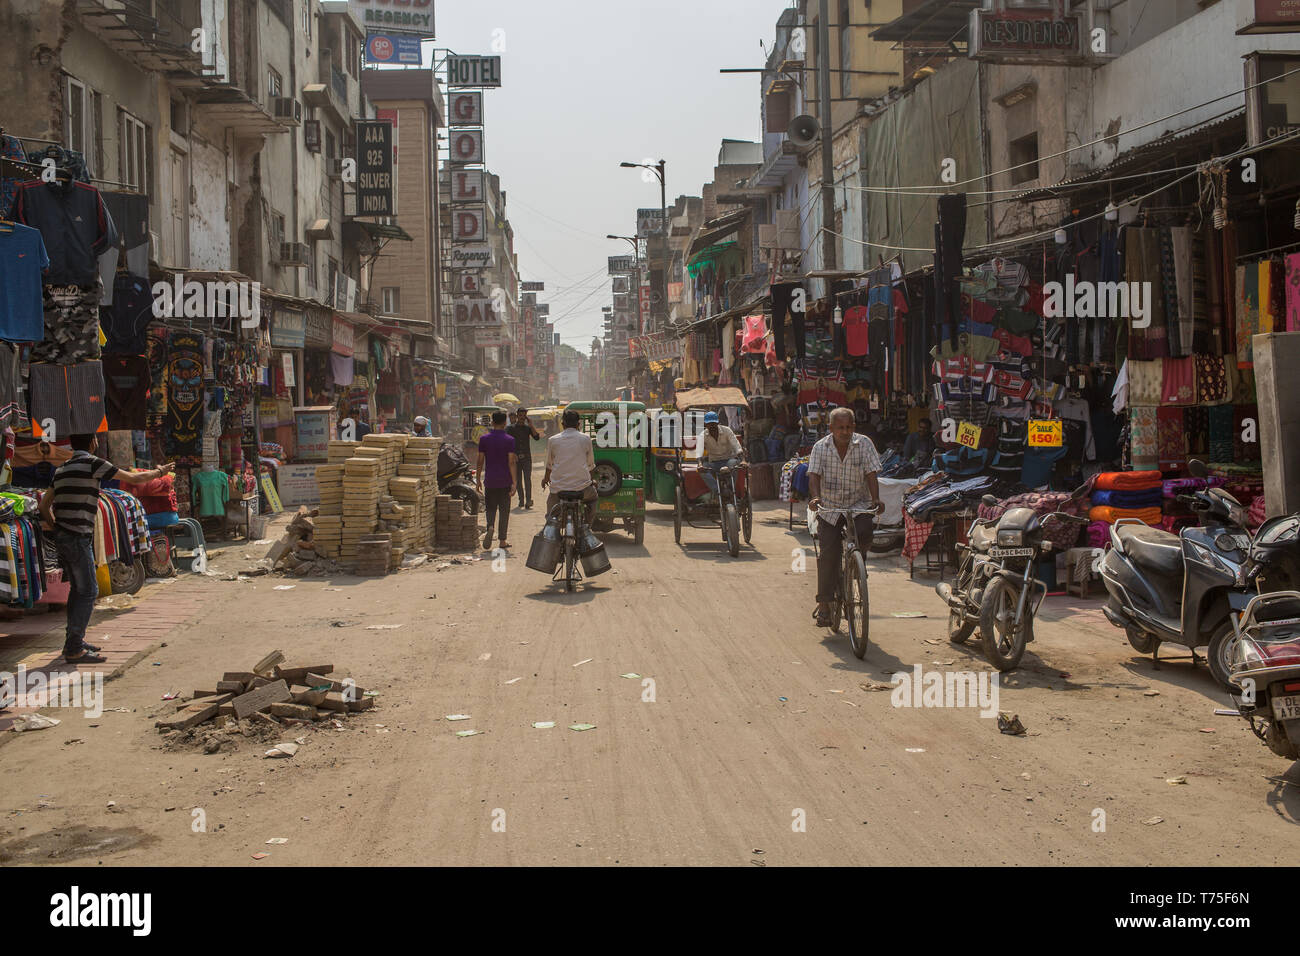 A hot and dry street in downtown New Delhi, India. Stock Photo